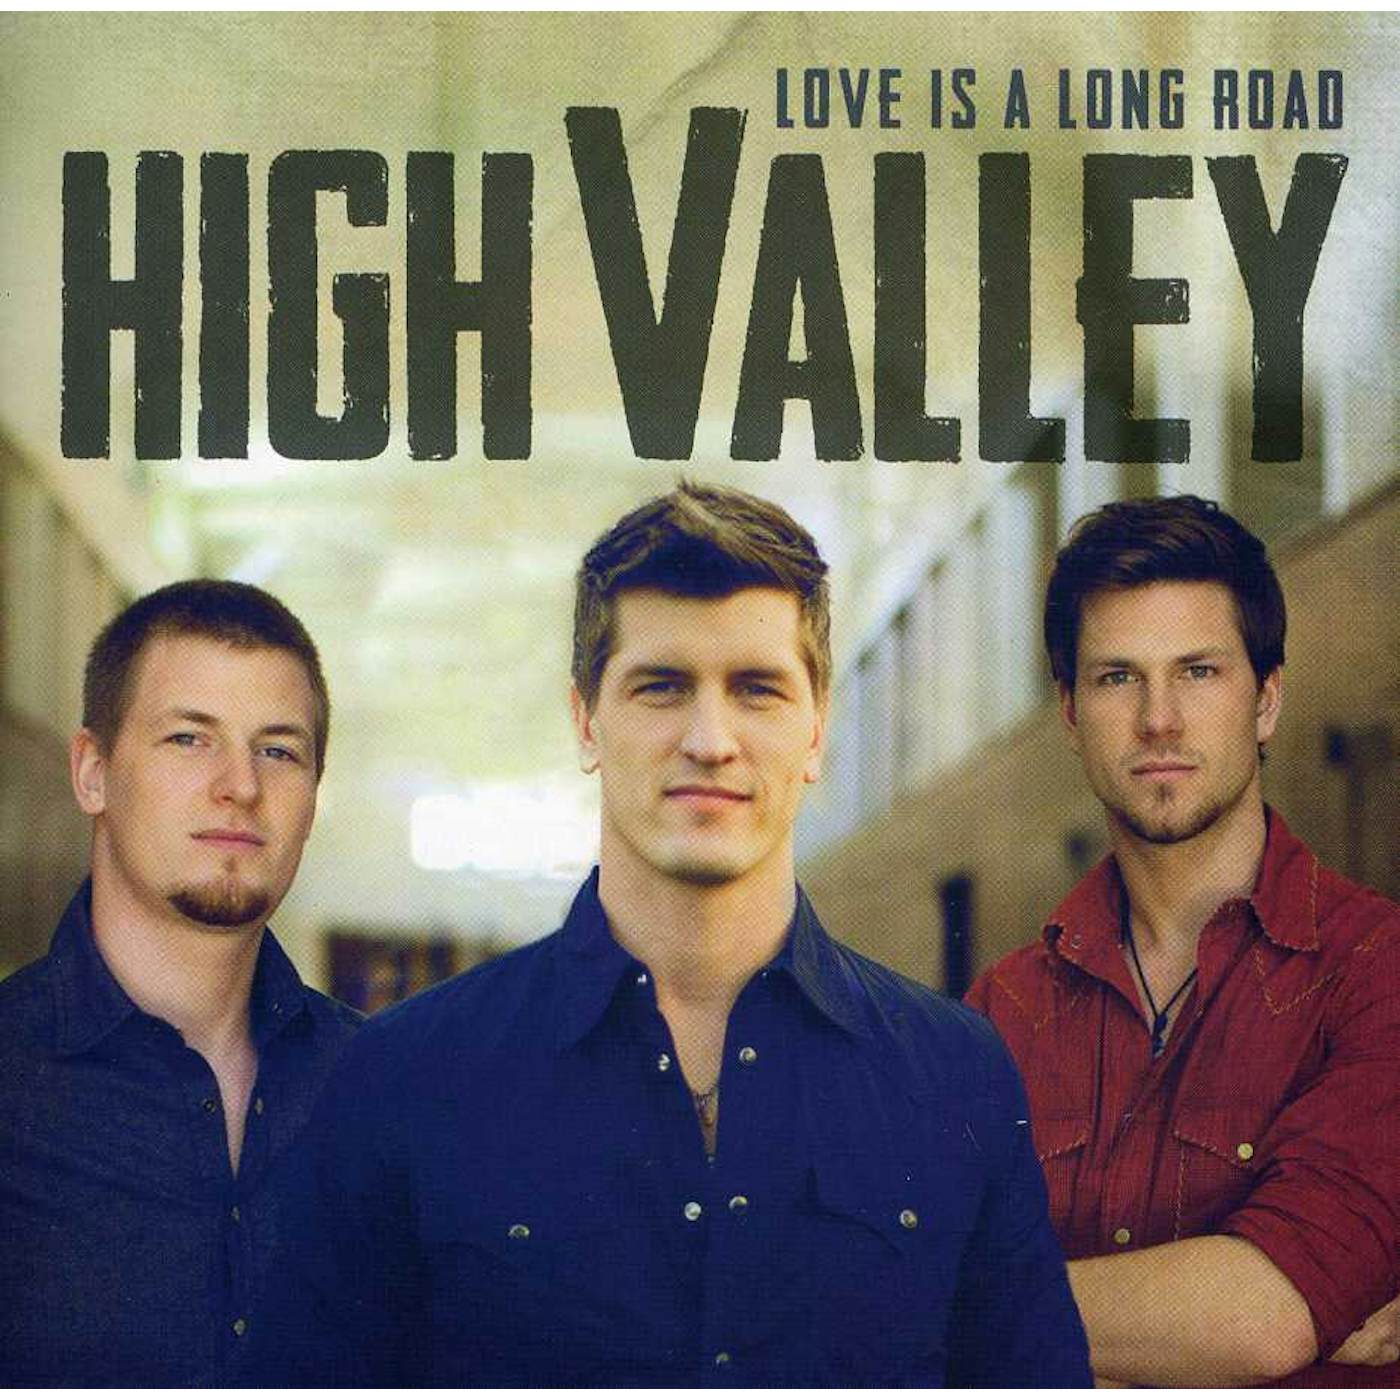 High Valley LOVE IS A LONG ROAD CD